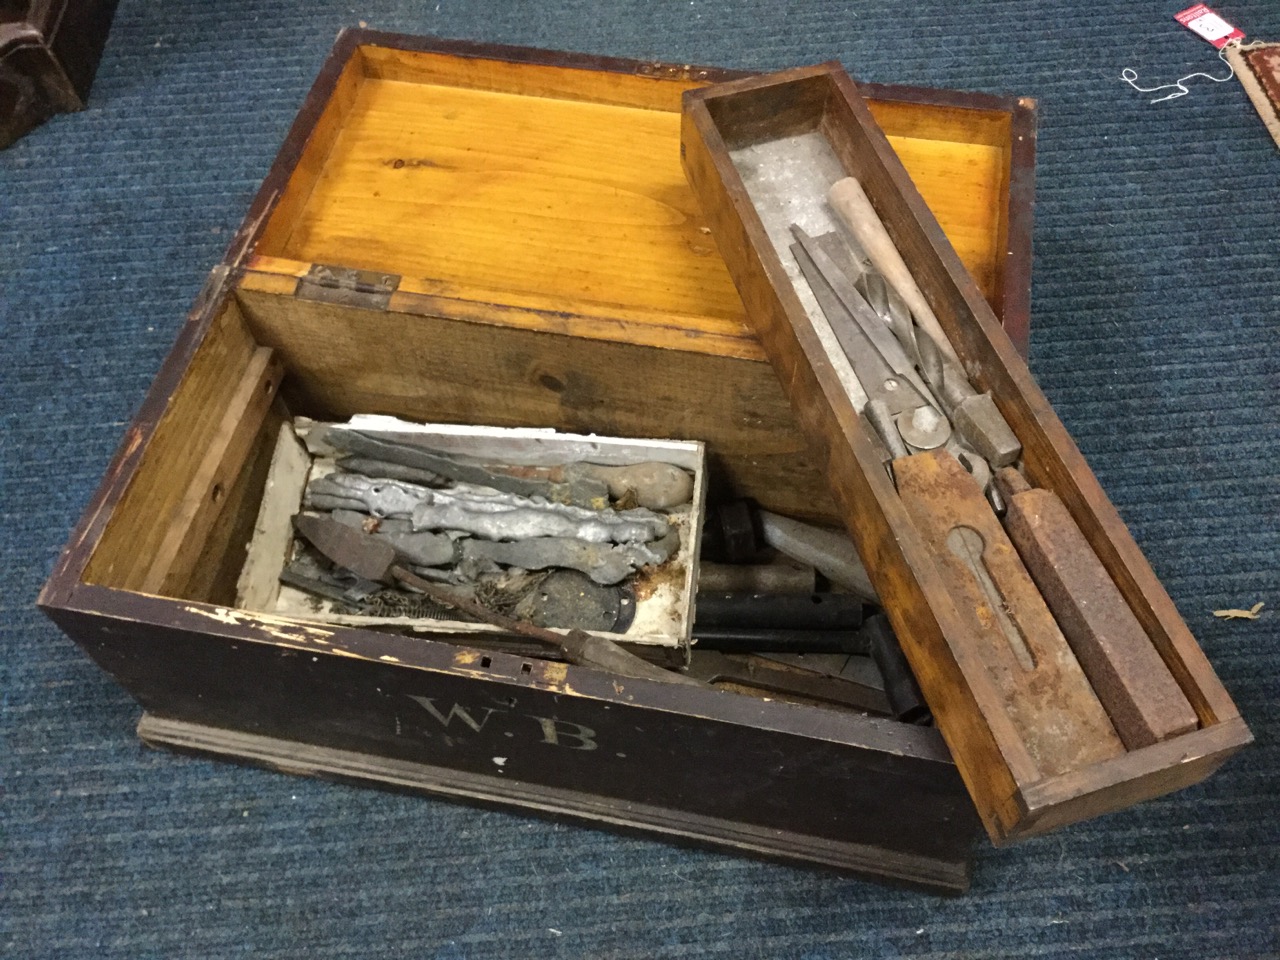 A lead workers pine toolbox of dovetailed construction on moulded plinth, containing interior tray - Image 2 of 3